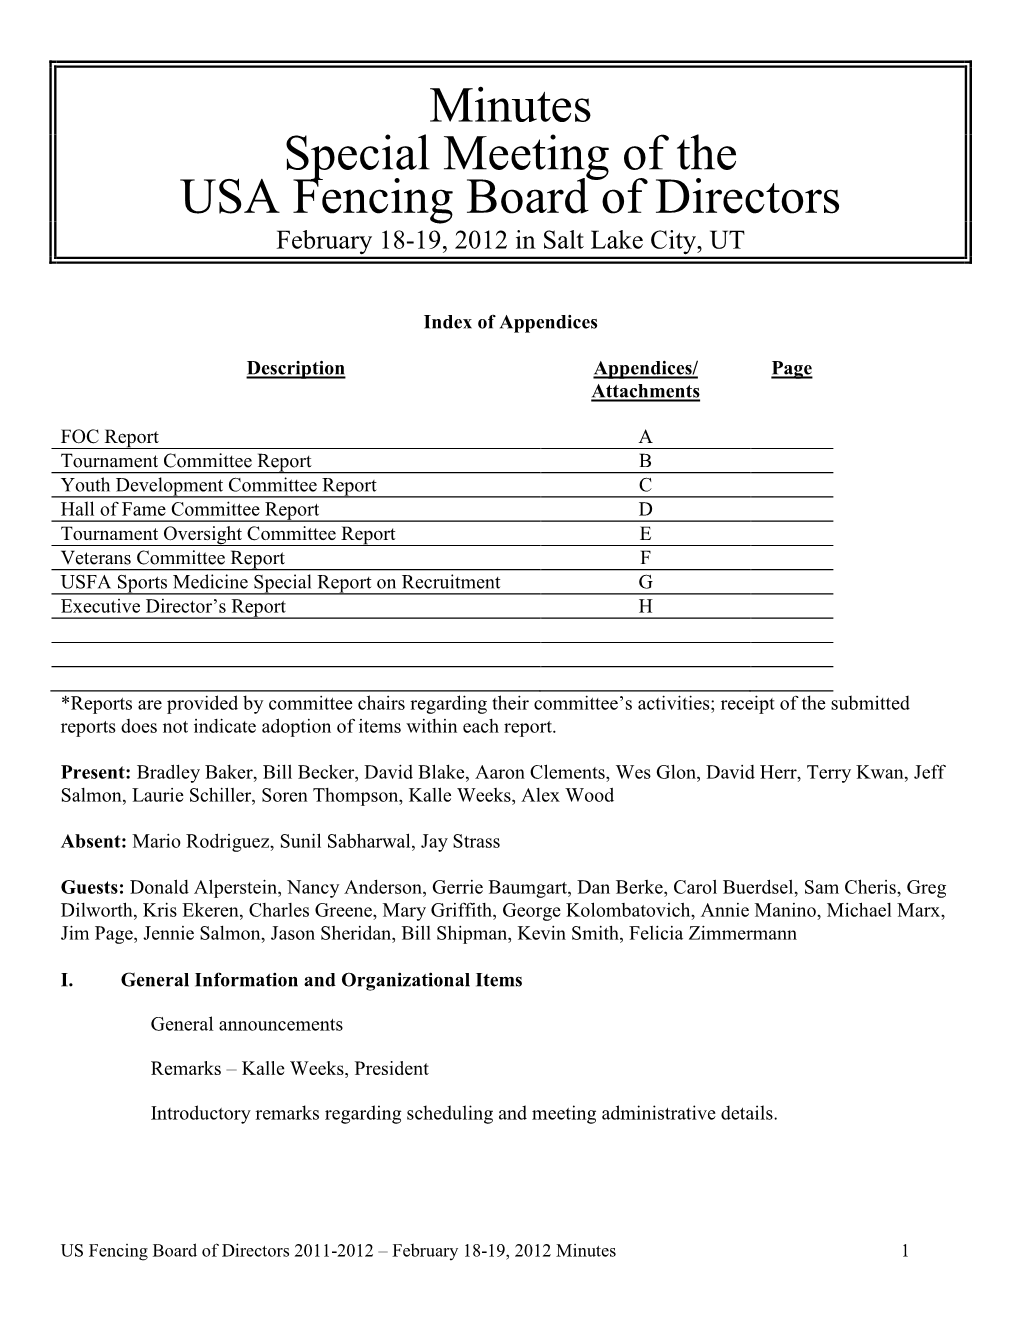 Minutes Special Meeting of the USA Fencing Board of Directors February 18-19, 2012 in Salt Lake City, UT